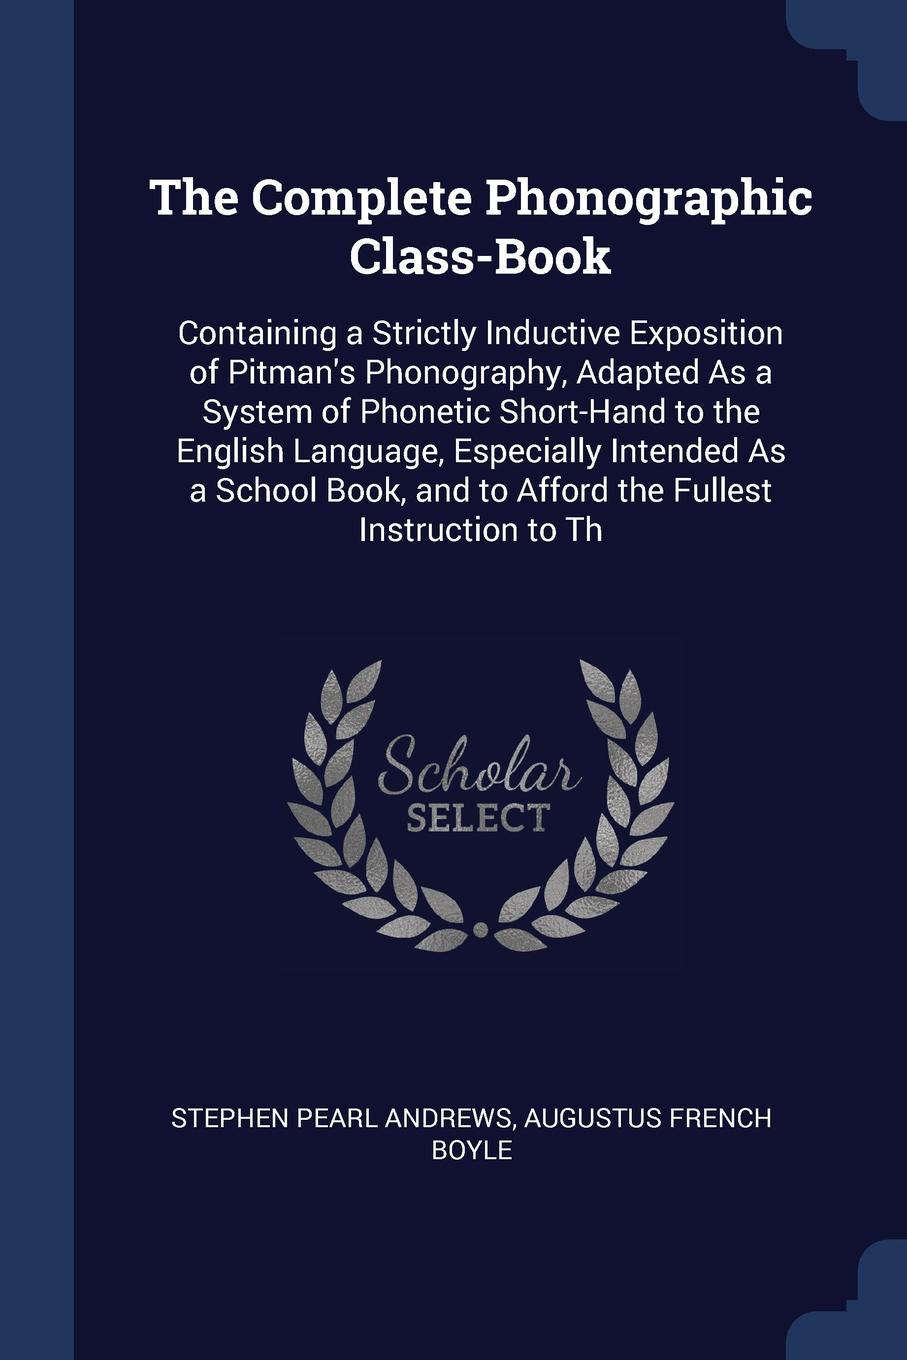 The Complete Phonographic Class-Book. Containing a Strictly Inductive Exposition of Pitman`s Phonography, Adapted As a System of Phonetic Short-Hand to the English Language, Especially Intended As a School Book, and to Afford the Fullest Instructi...